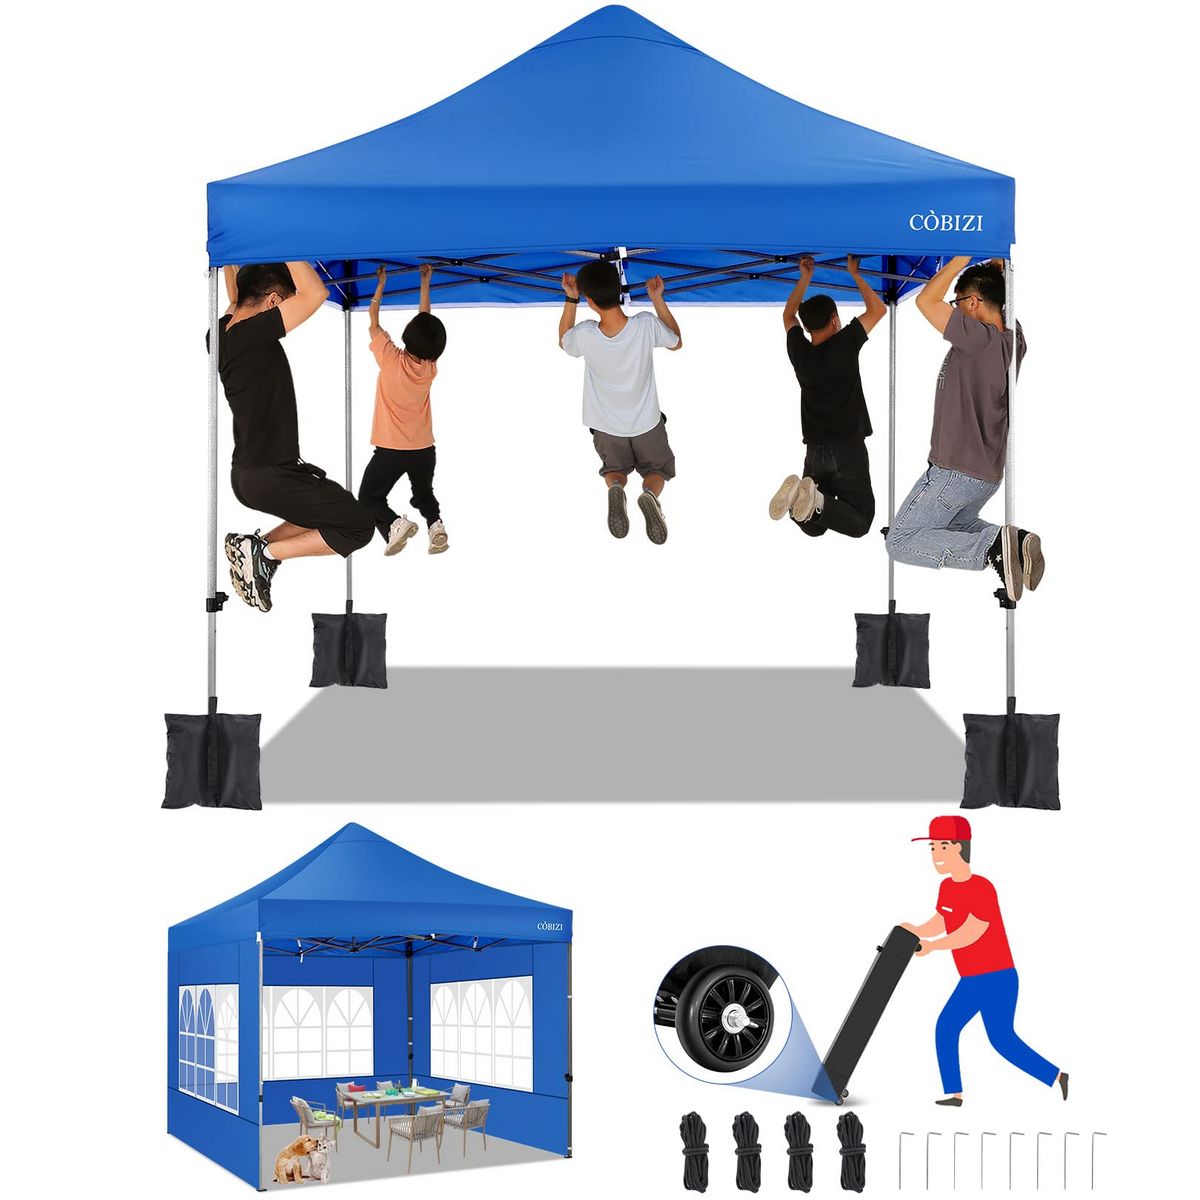 COBIZI 10 x10 Pop up Commercial Canopy, Heavy Duty Canopy Tent with 4 Sidewalls, Instant Outdoor Party Tent,Windproof & Waterproof Gazebo with Roller Bag,Blue (Frame Thickened)